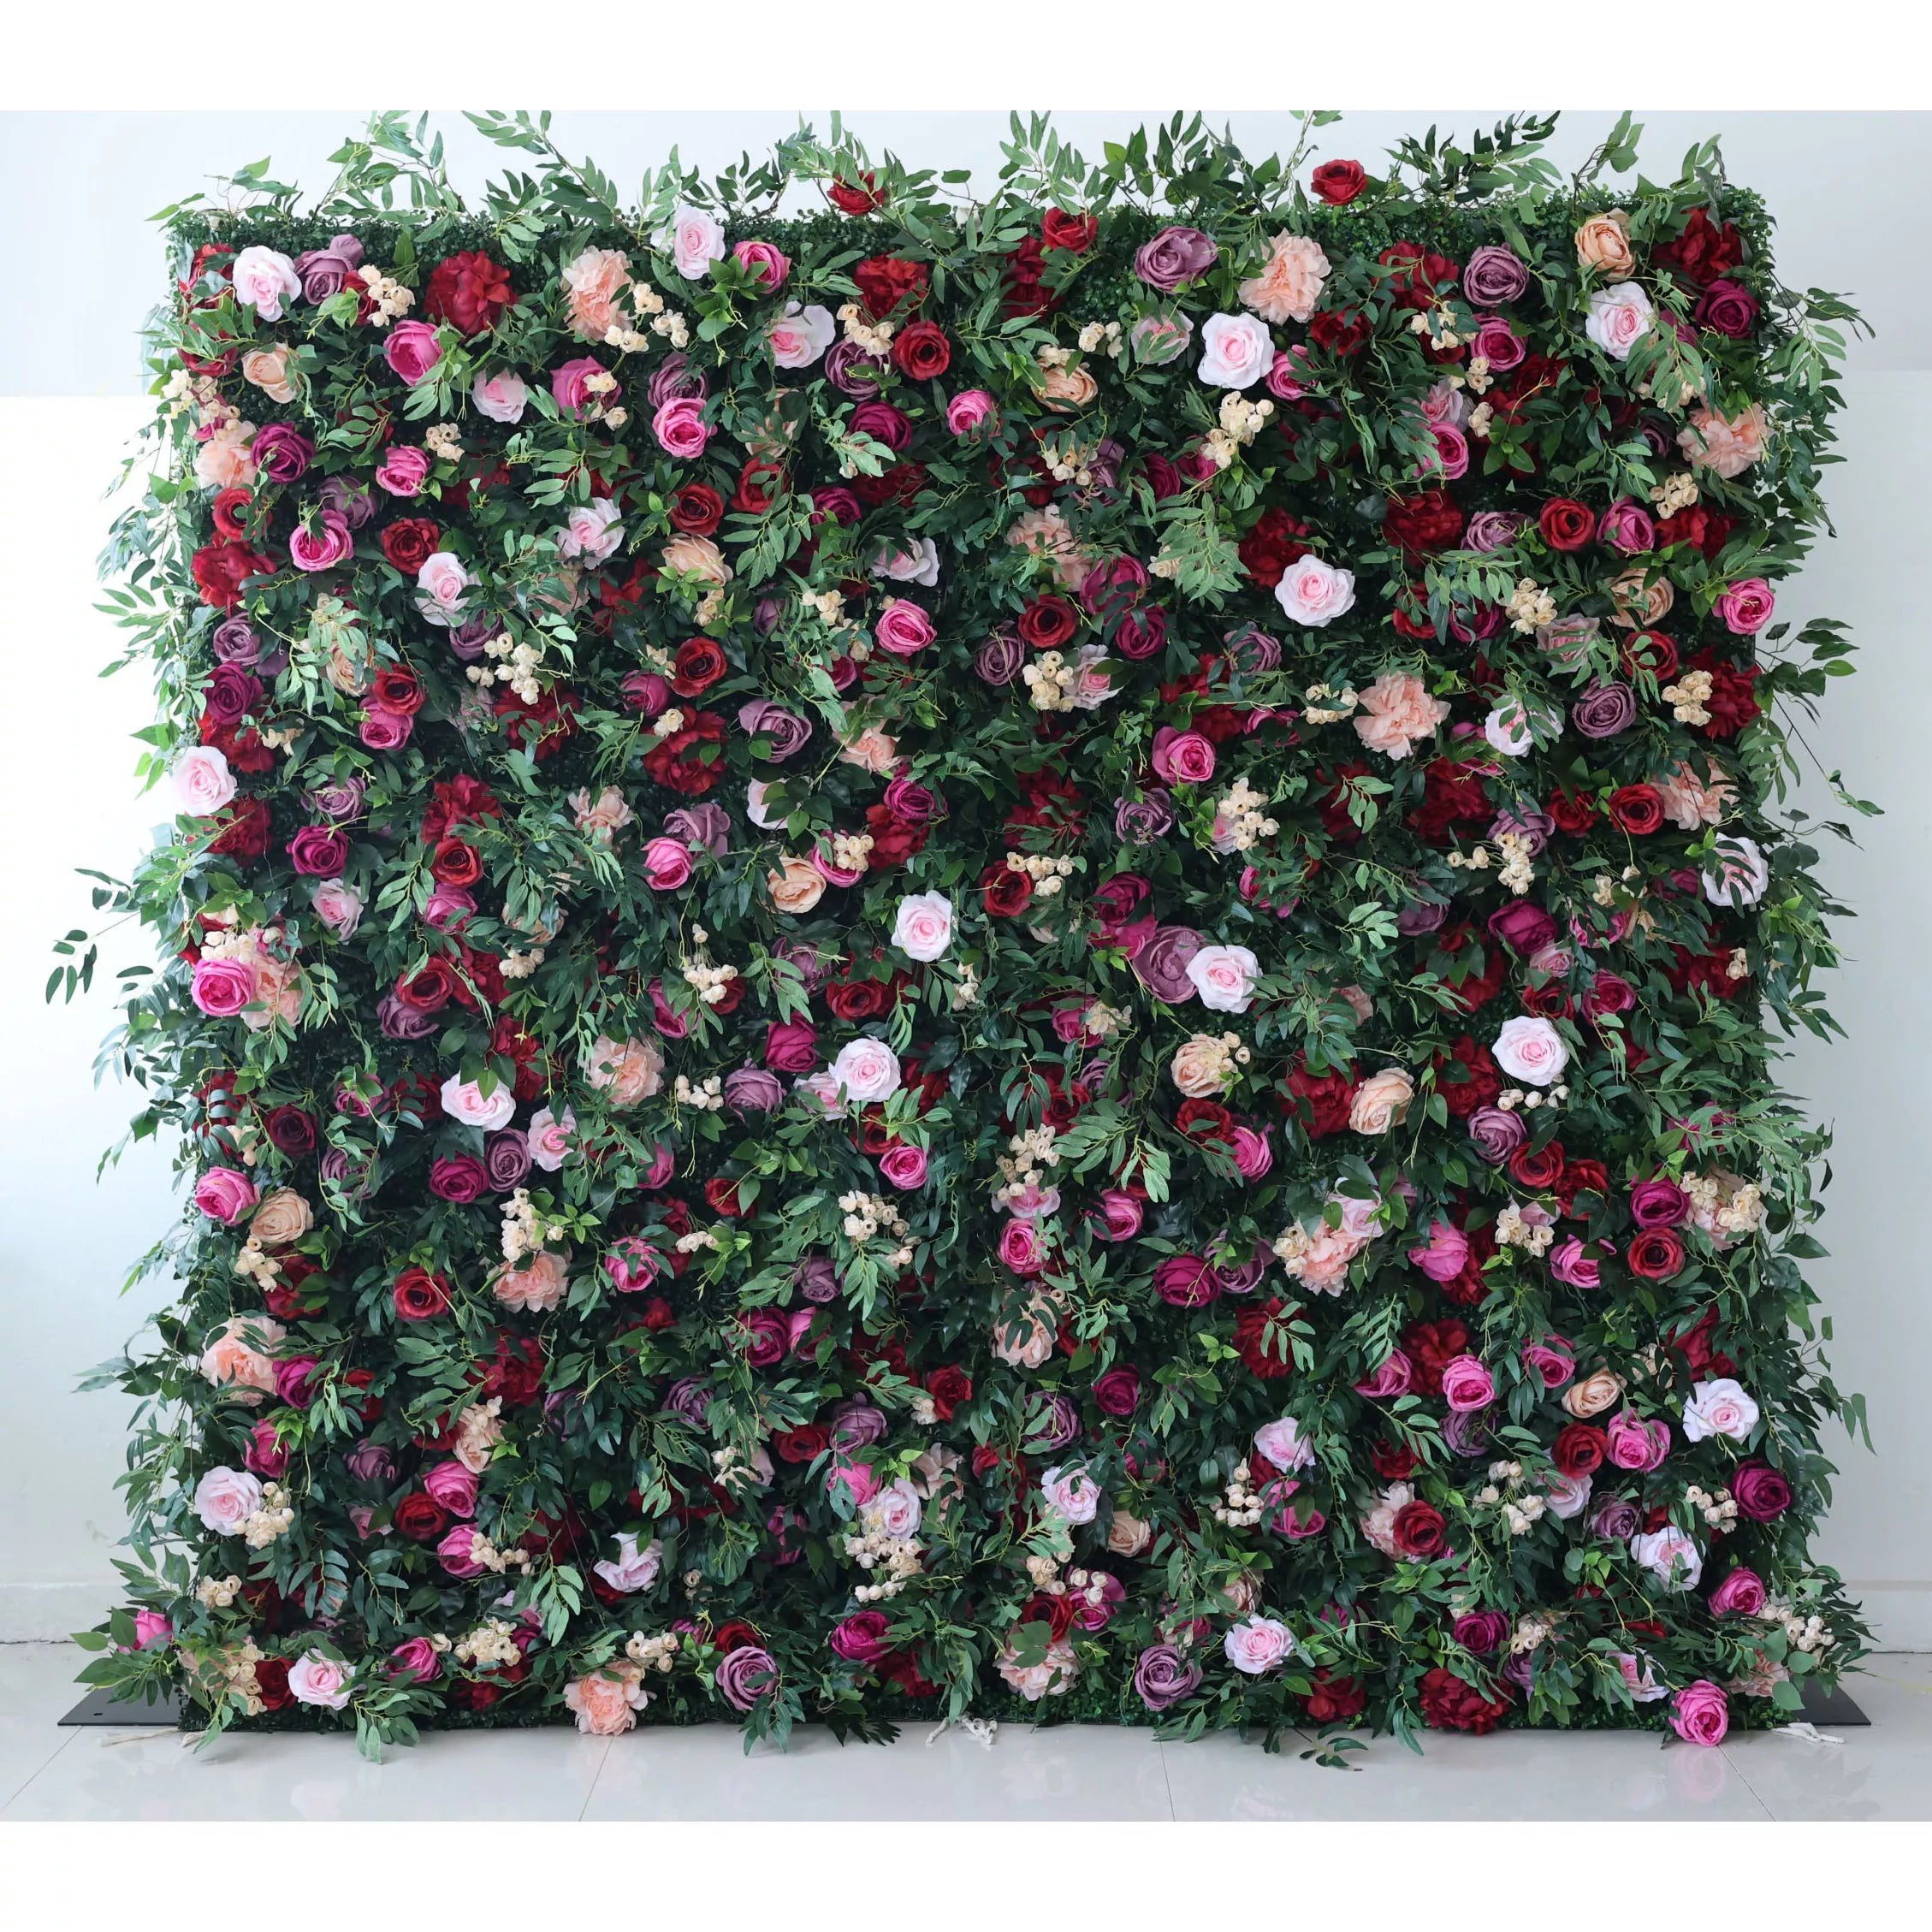 Valar Flowers artificial green mixed with pink, purple, and white roll up fabric floral wall backdrop5